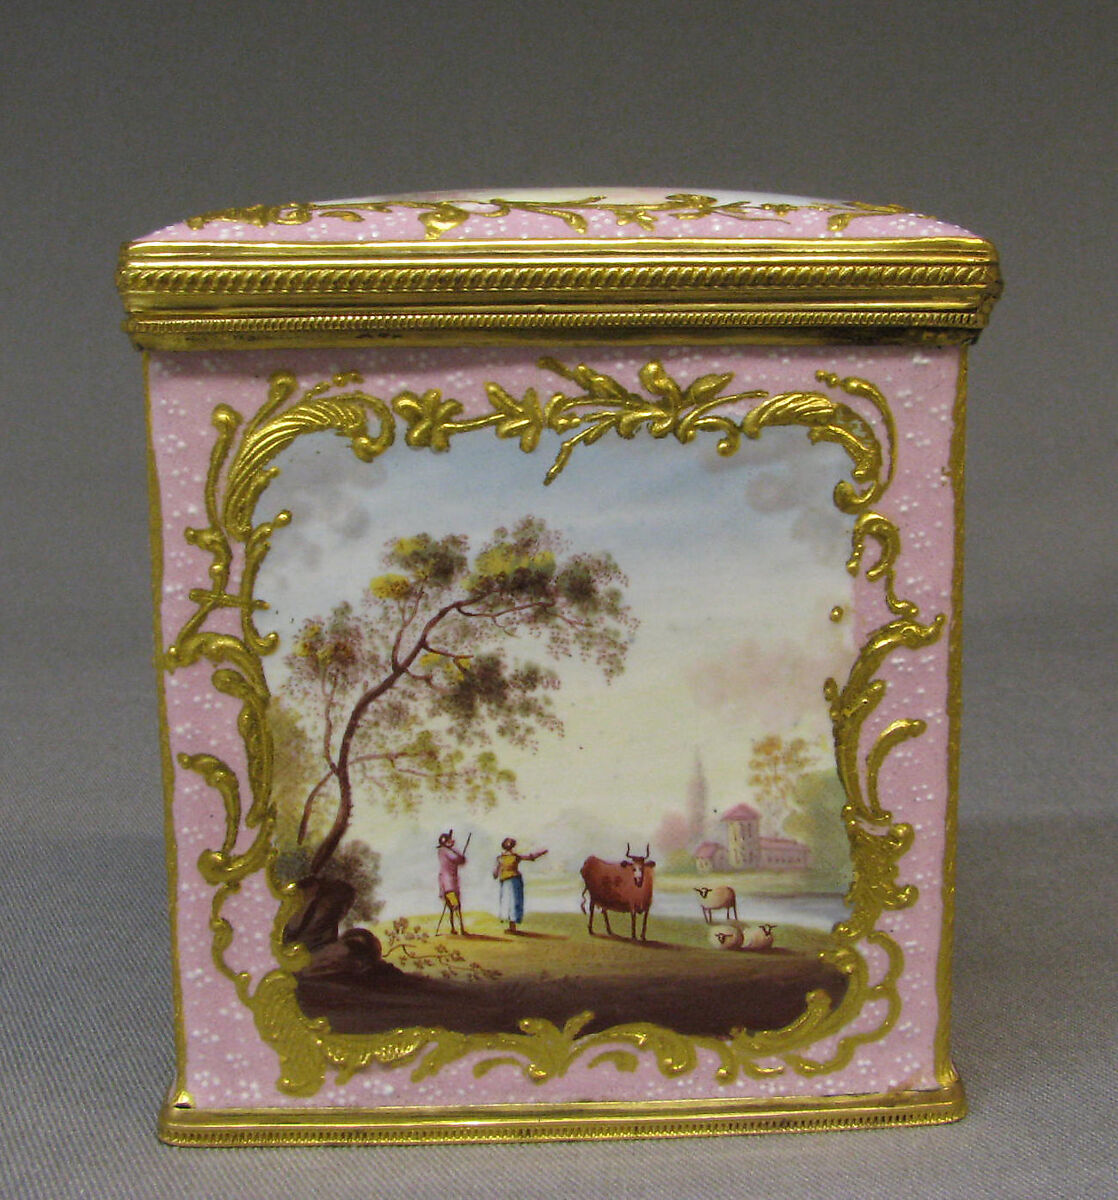 Sugar box (part of a set), White enamel on copper painted in polychrome enamels, British, South Staffordshire 